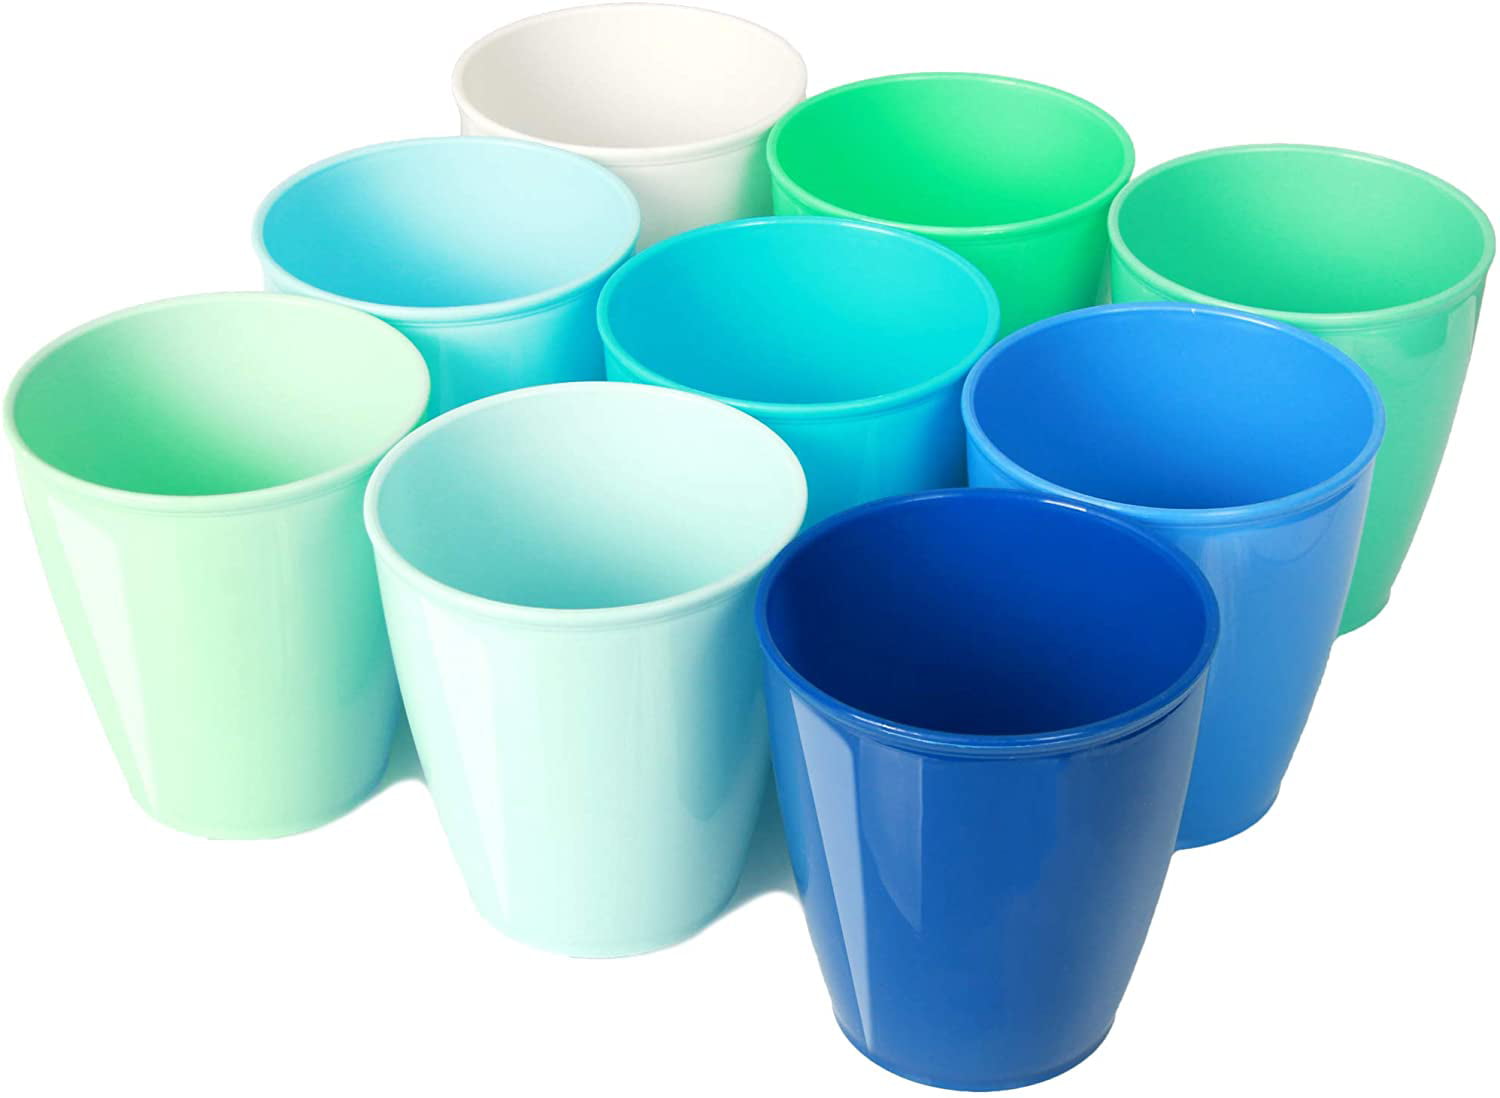 Unbreakable Plastic Cups Reusable Toddler Cups Color Milk Kids Drinking Cup LB 